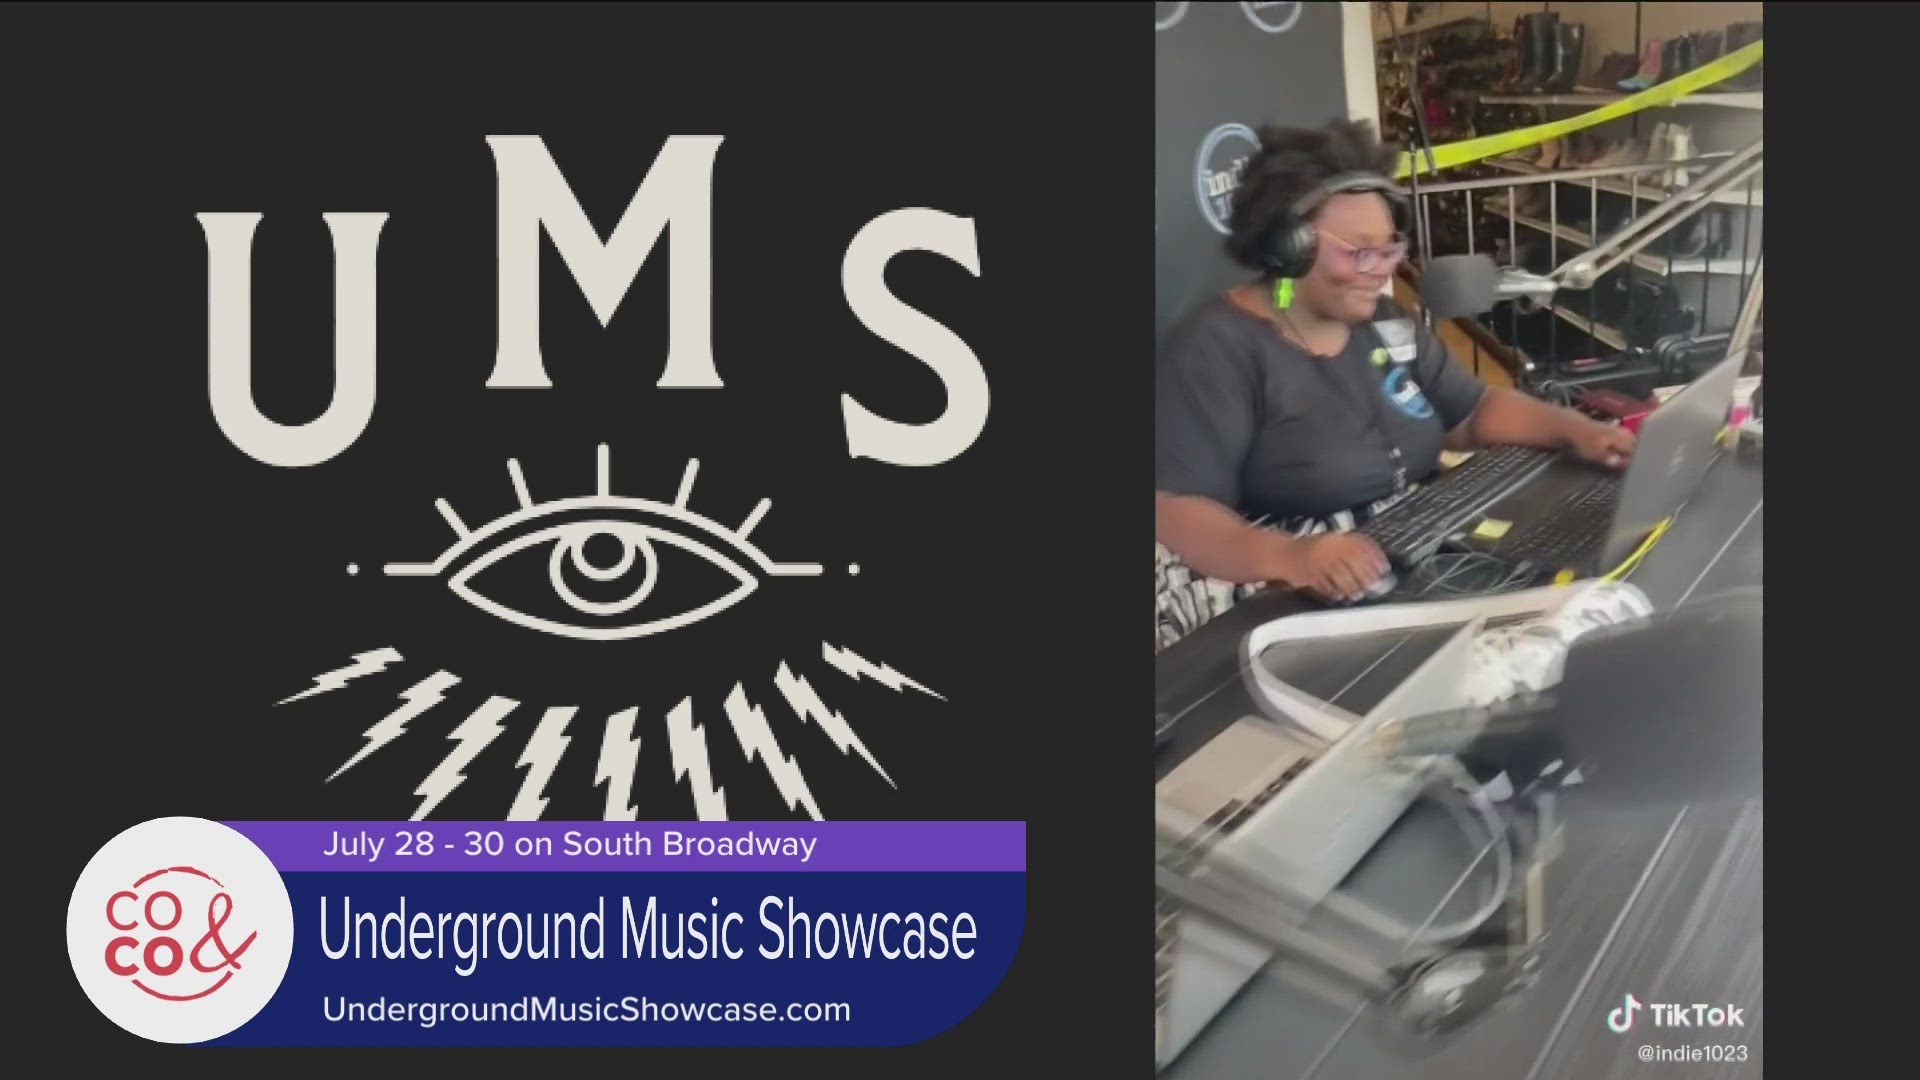 The UMS starts on July 28 and runs through the 30th on South Broadway. Get your tickets and learn more at UndergroundMusicShowcase.com.